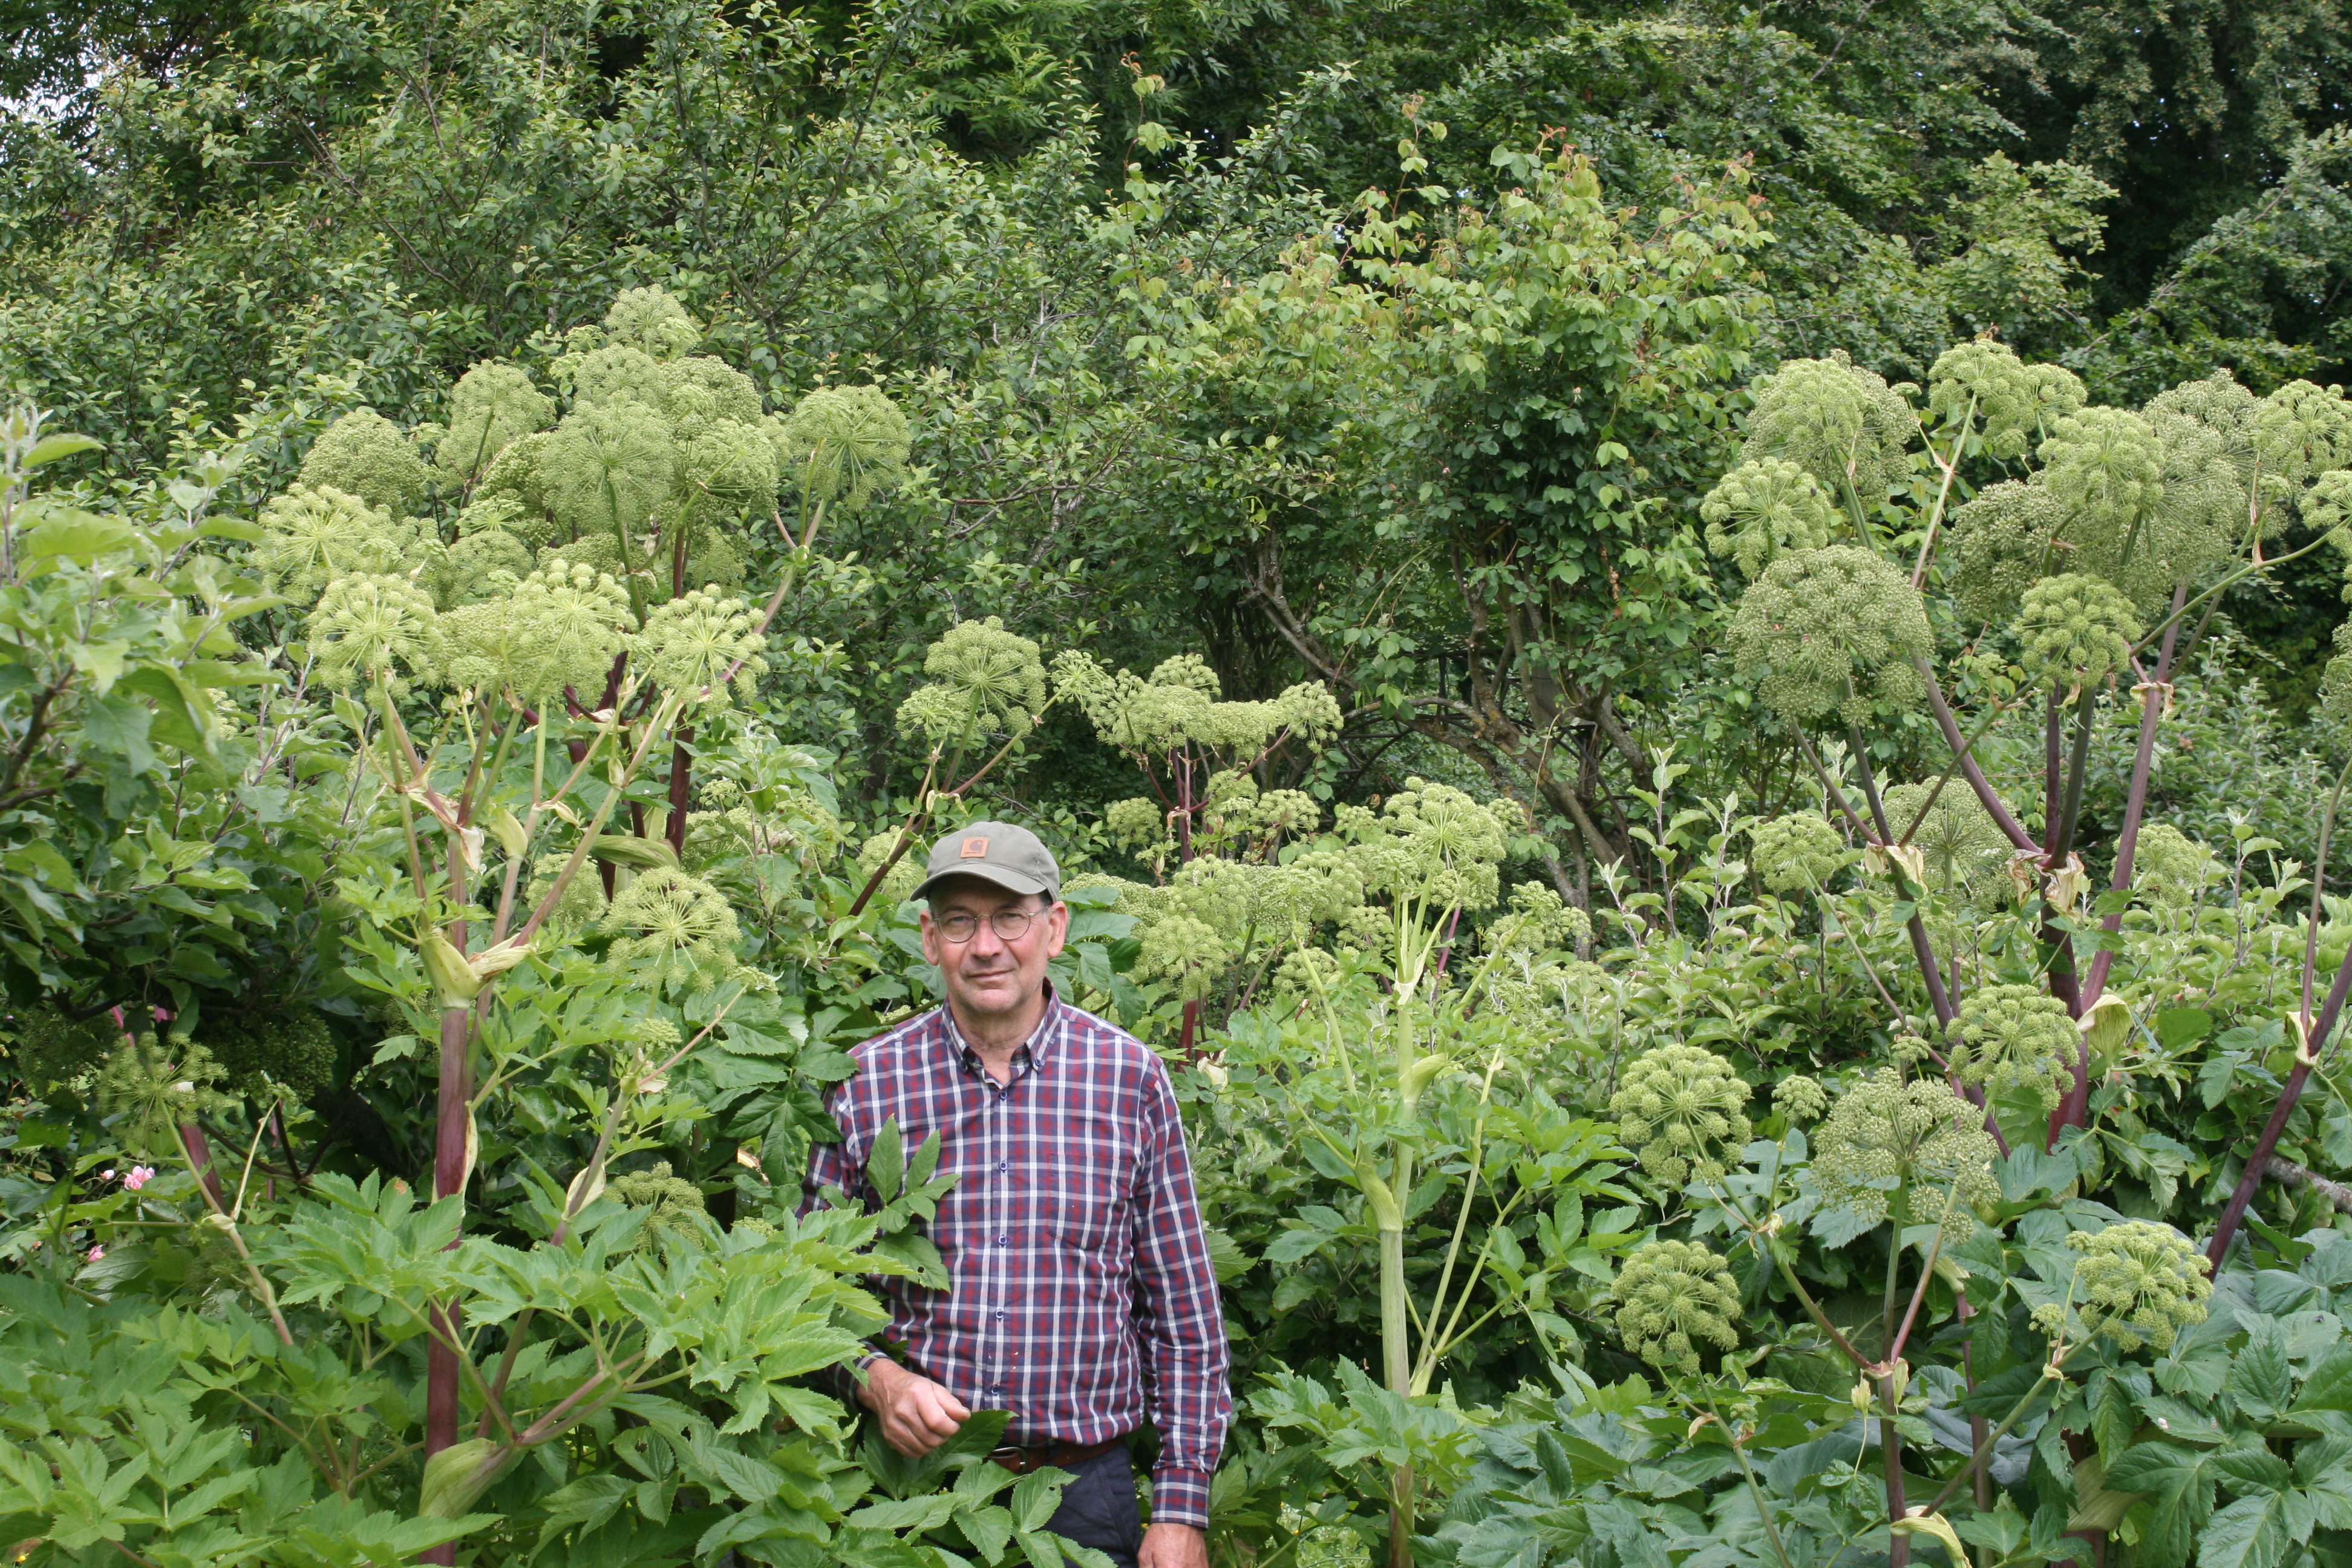 Angelica is a very good plant for mining bees